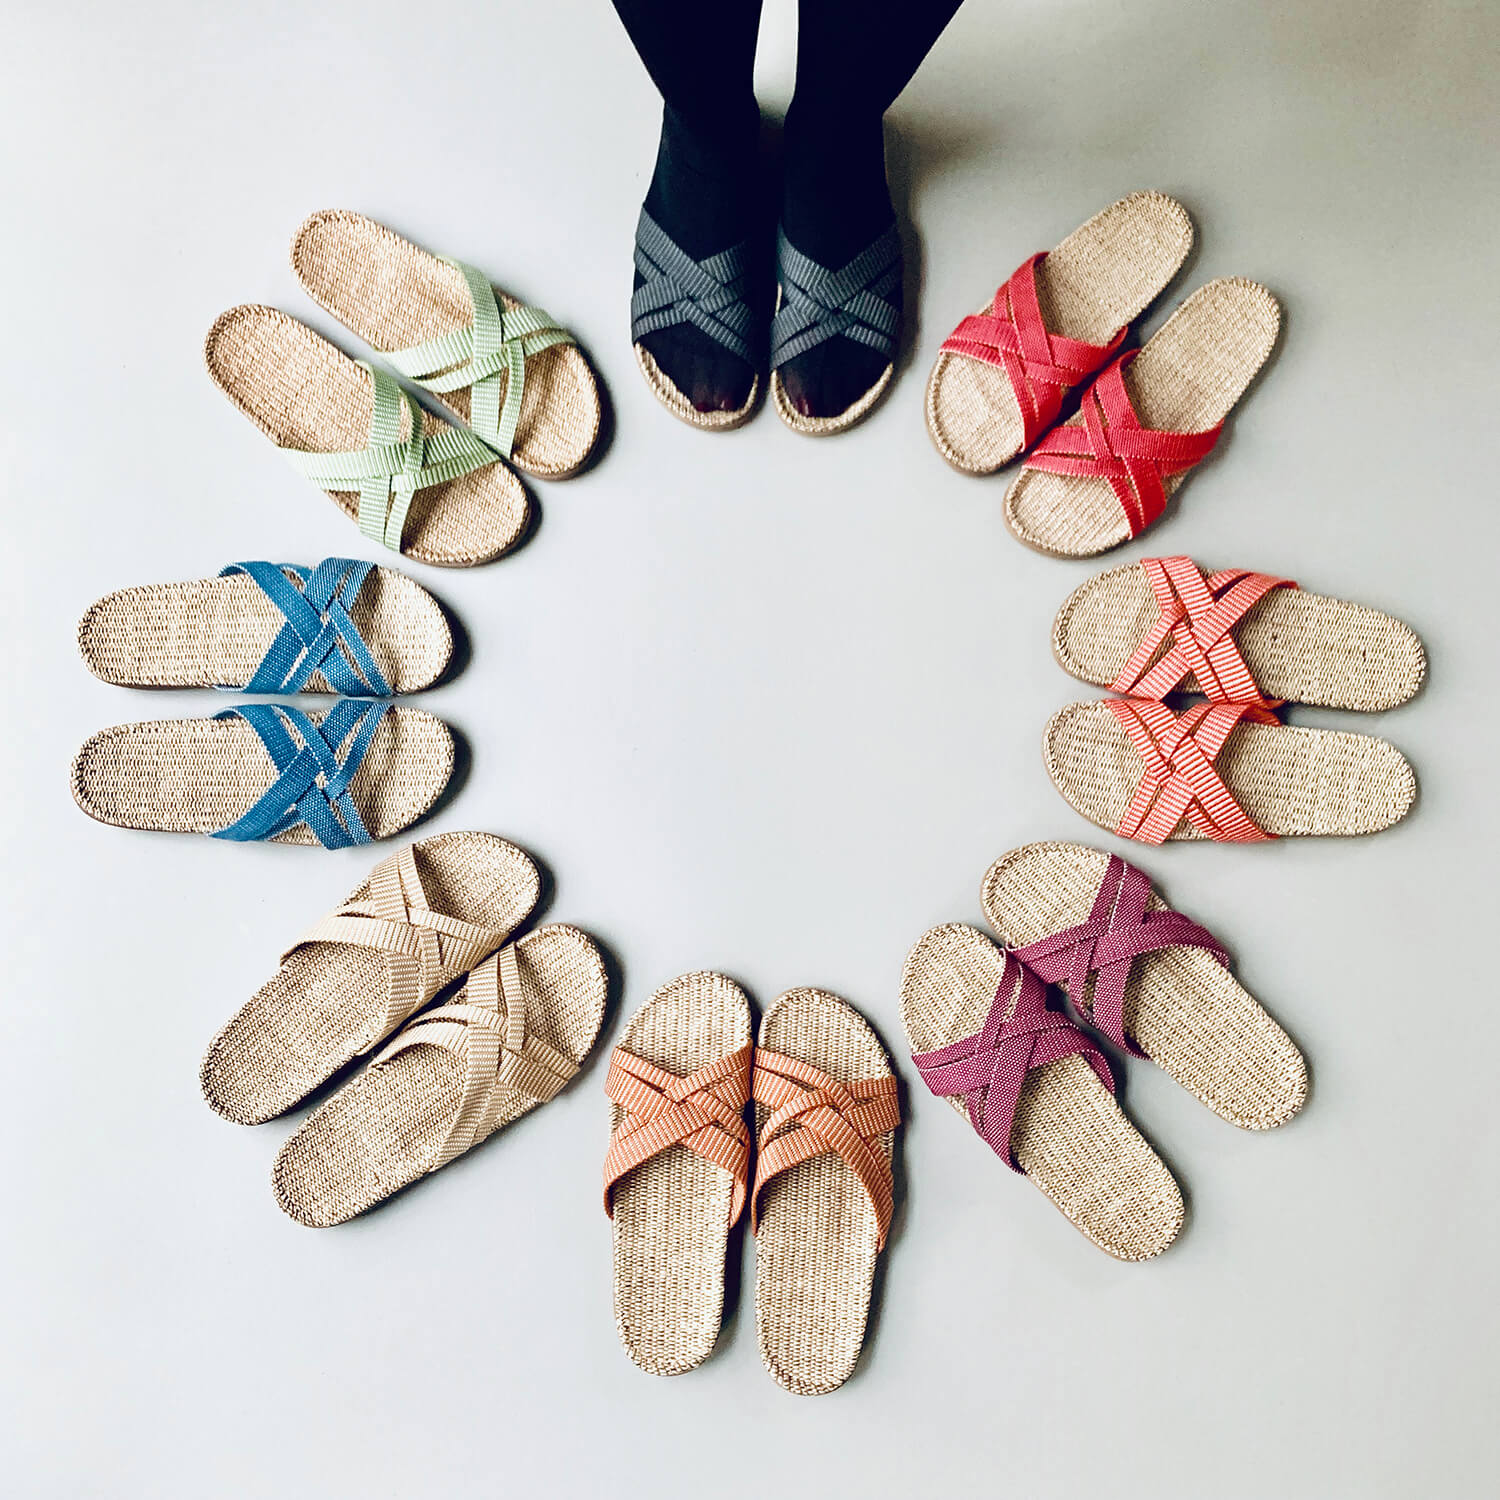 A circle of Shangies sandals in various colourways